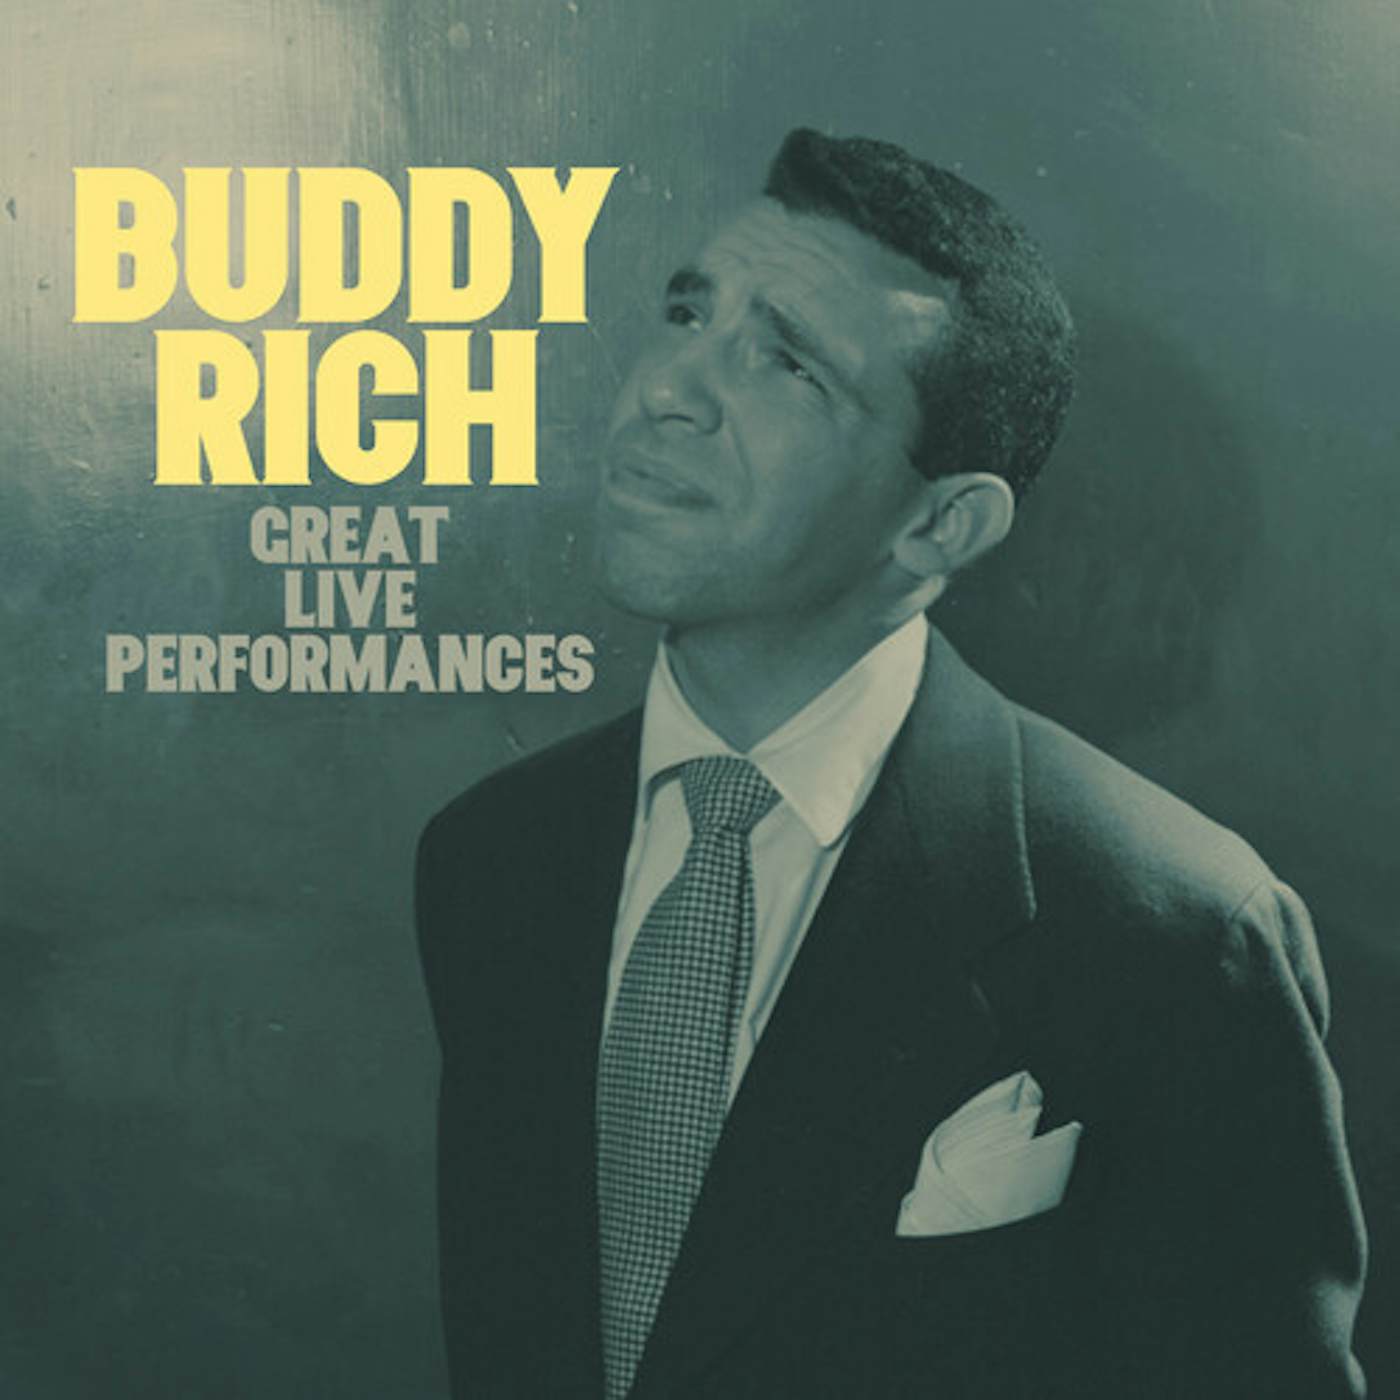 Buddy Rich GREAT LIVE PERFORMANCES CD